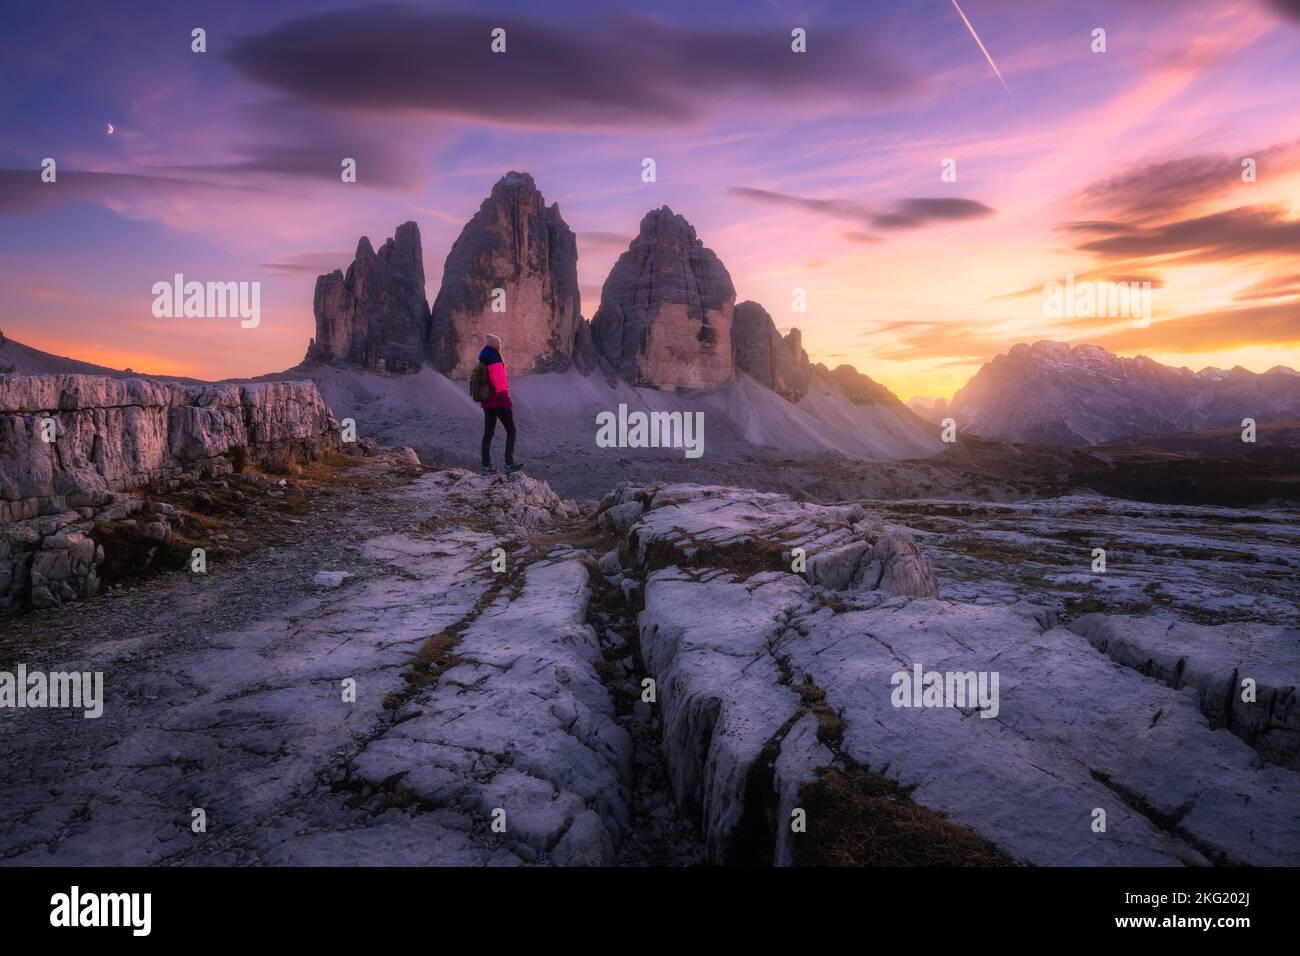 Girl on the mountain peak and high rocks at colorful sunset Stock Photo